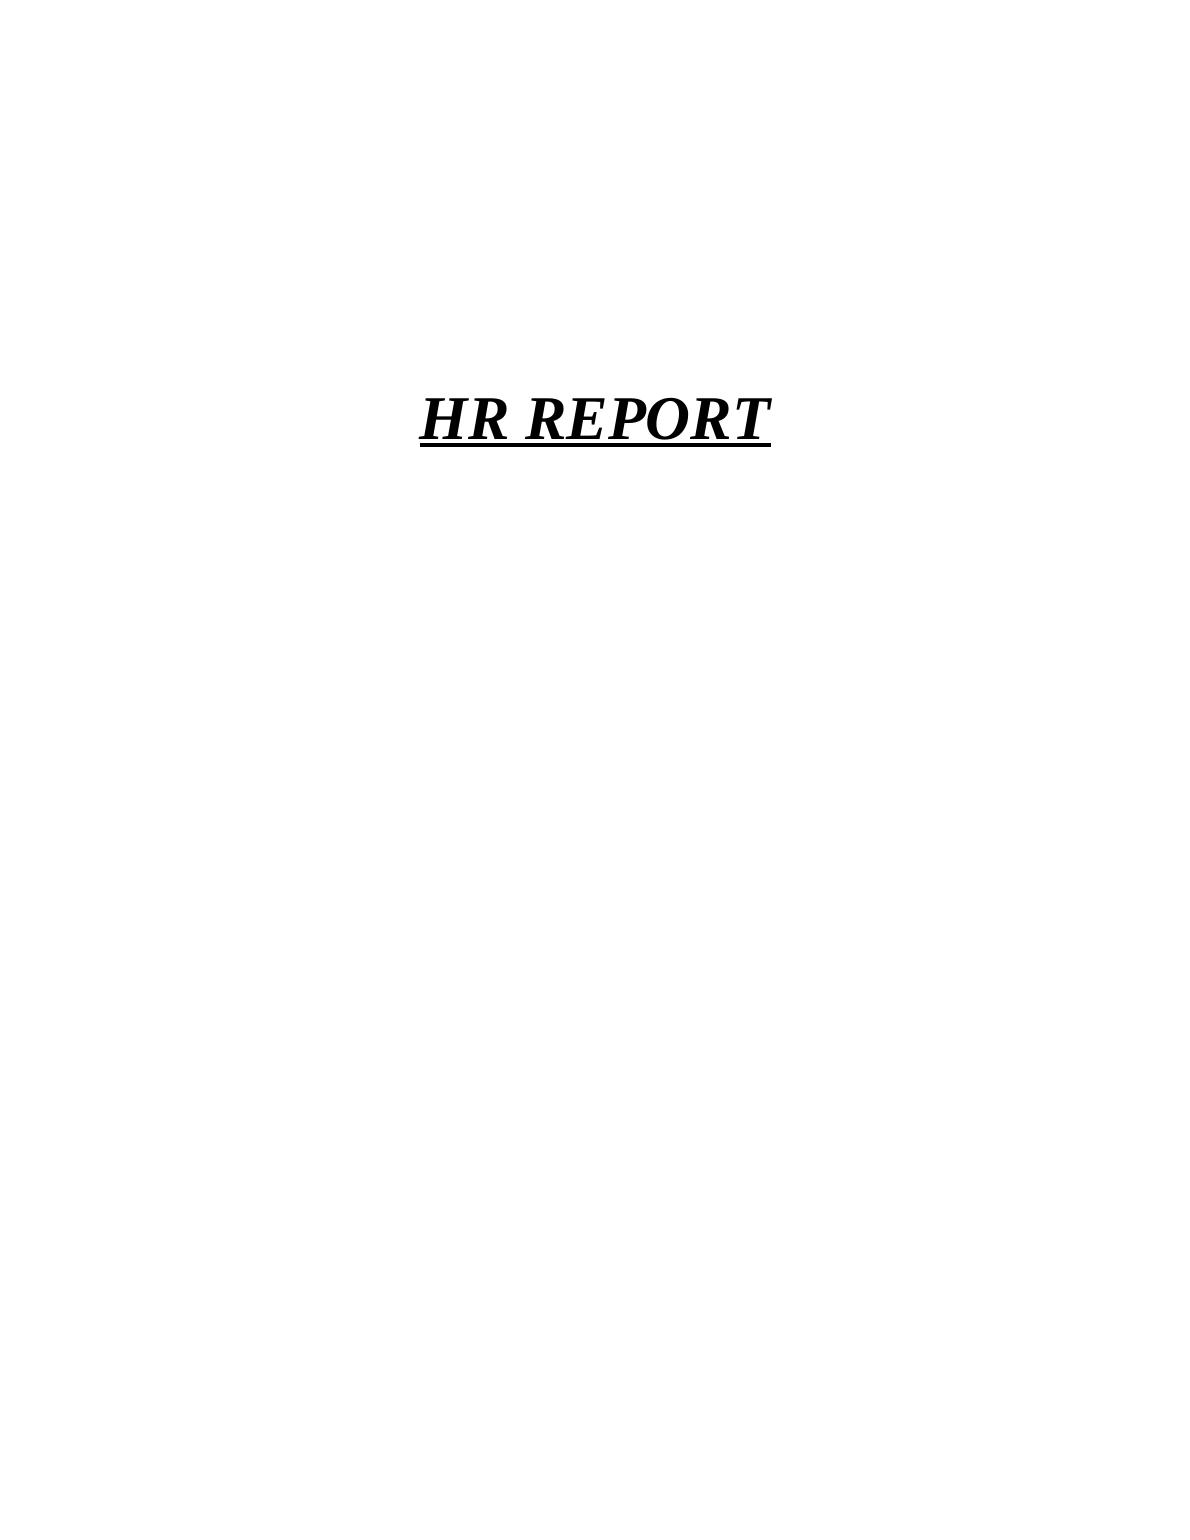 HR Report - Mother London_1